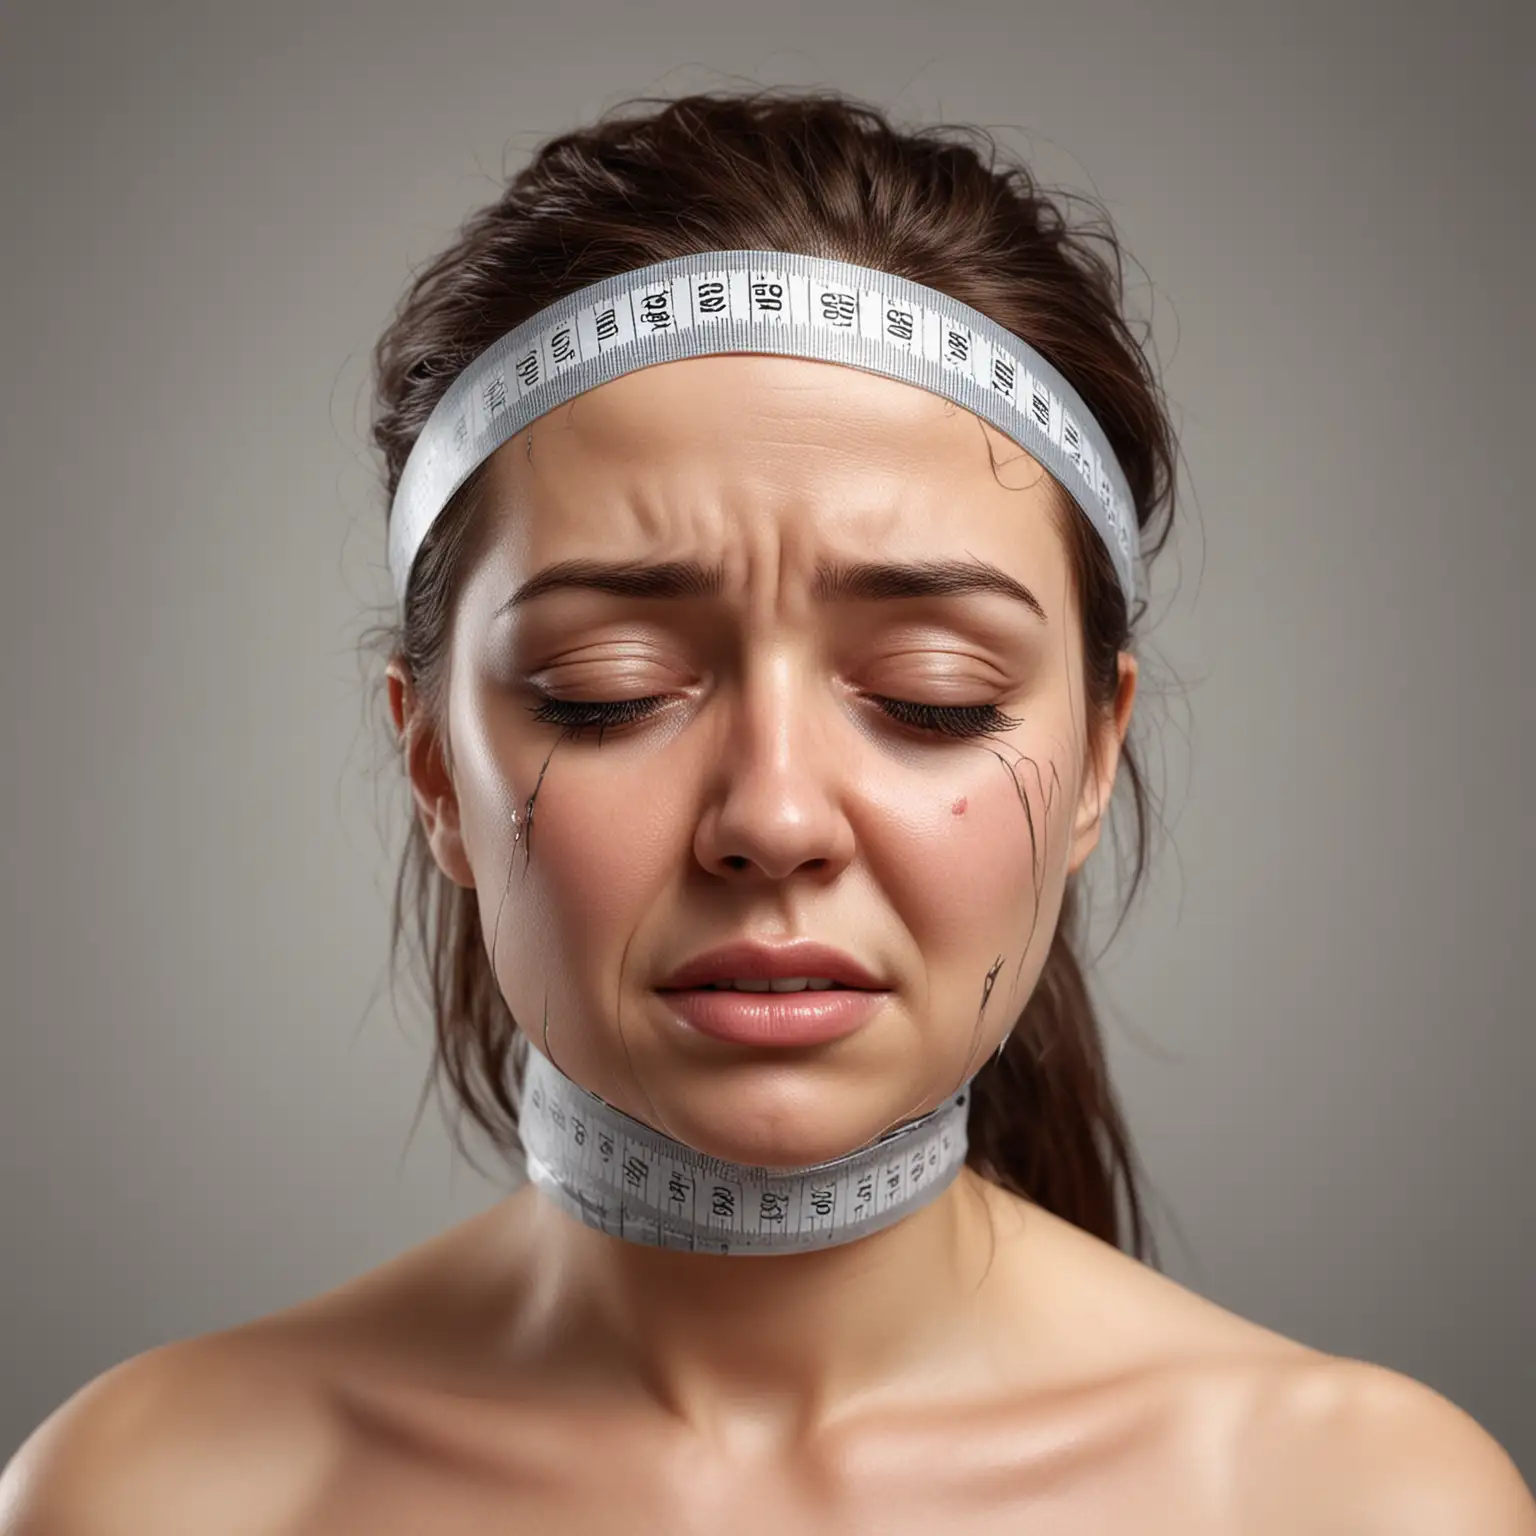 Unhappy Woman with Measuring Tape Wrapped Around Head